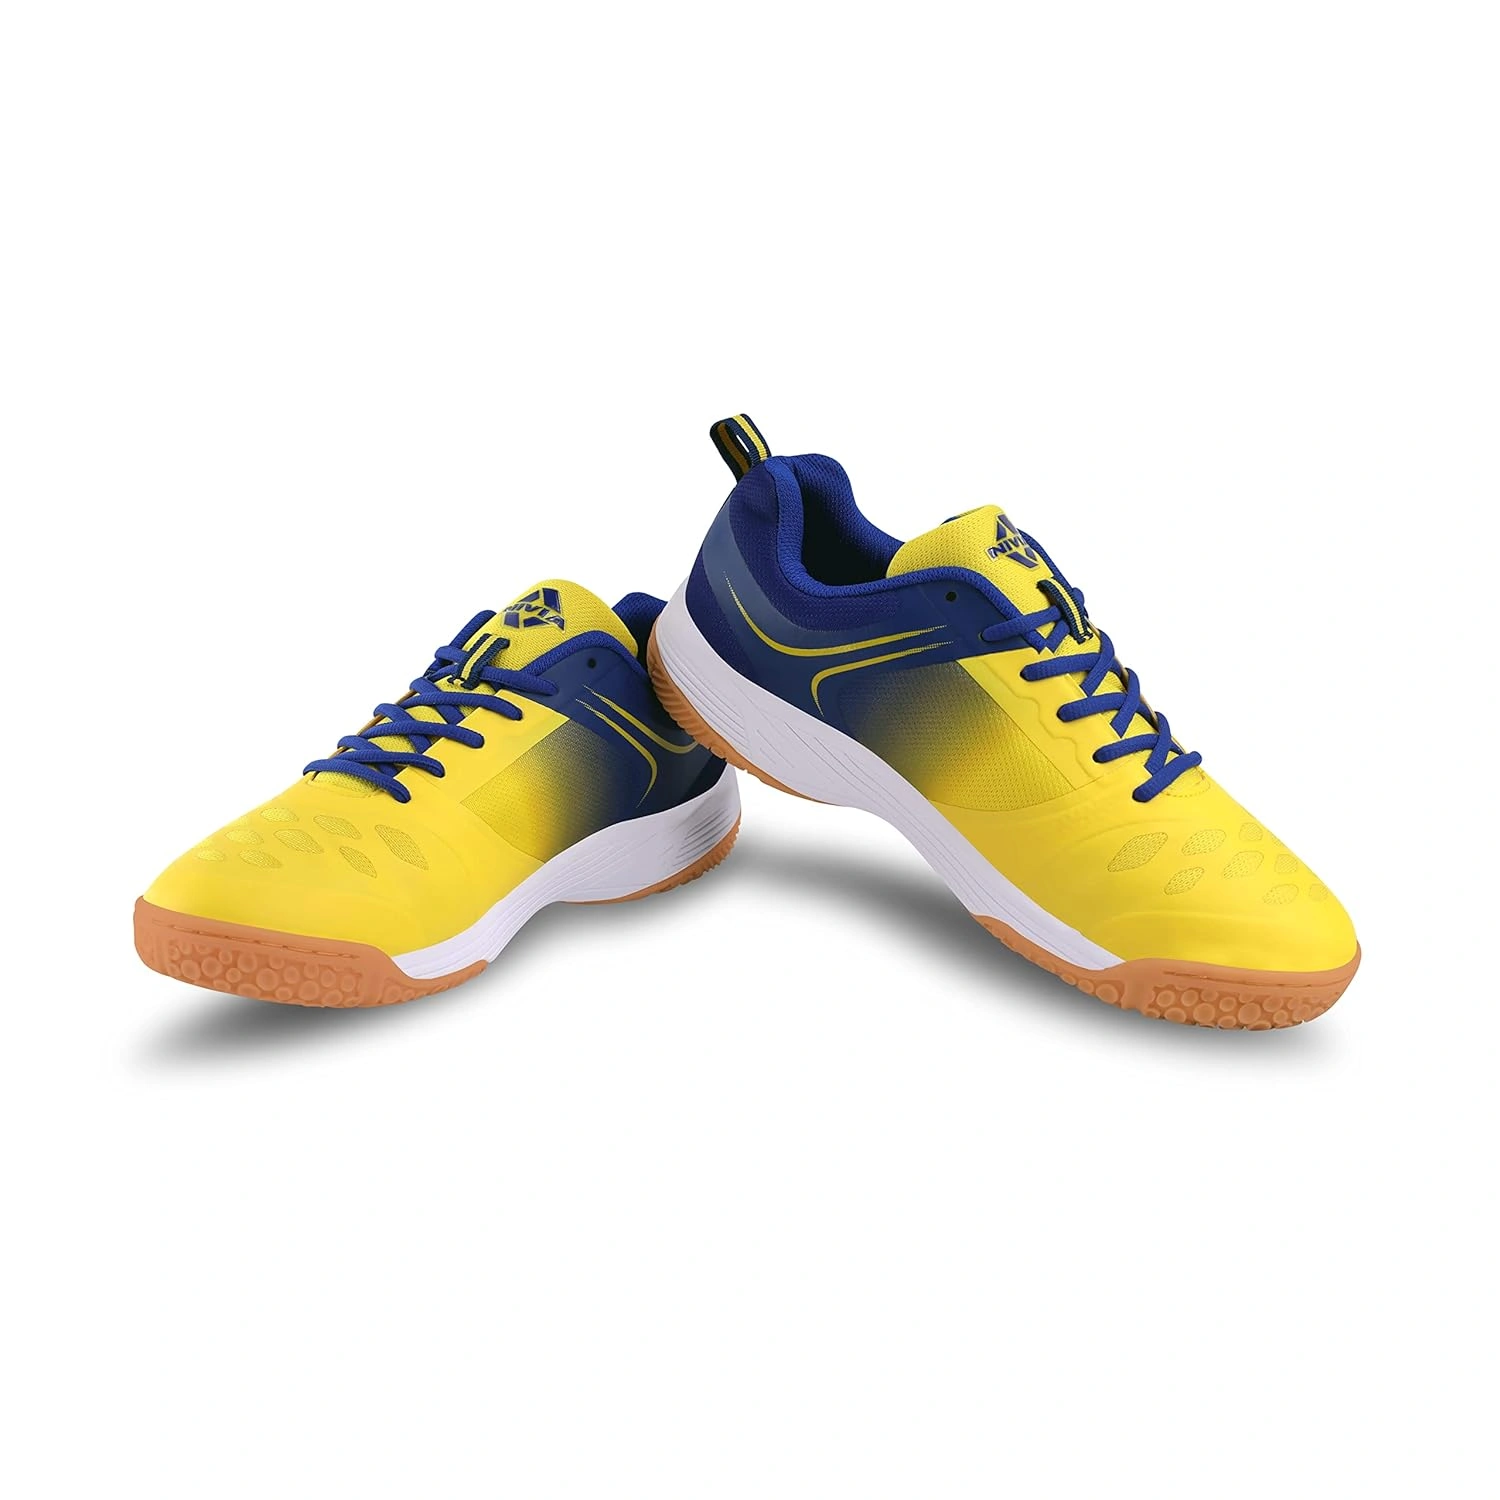 Nivia Hy-court 2.0 Badminton Shoes For Mens-YELL/ BLUE-4-5